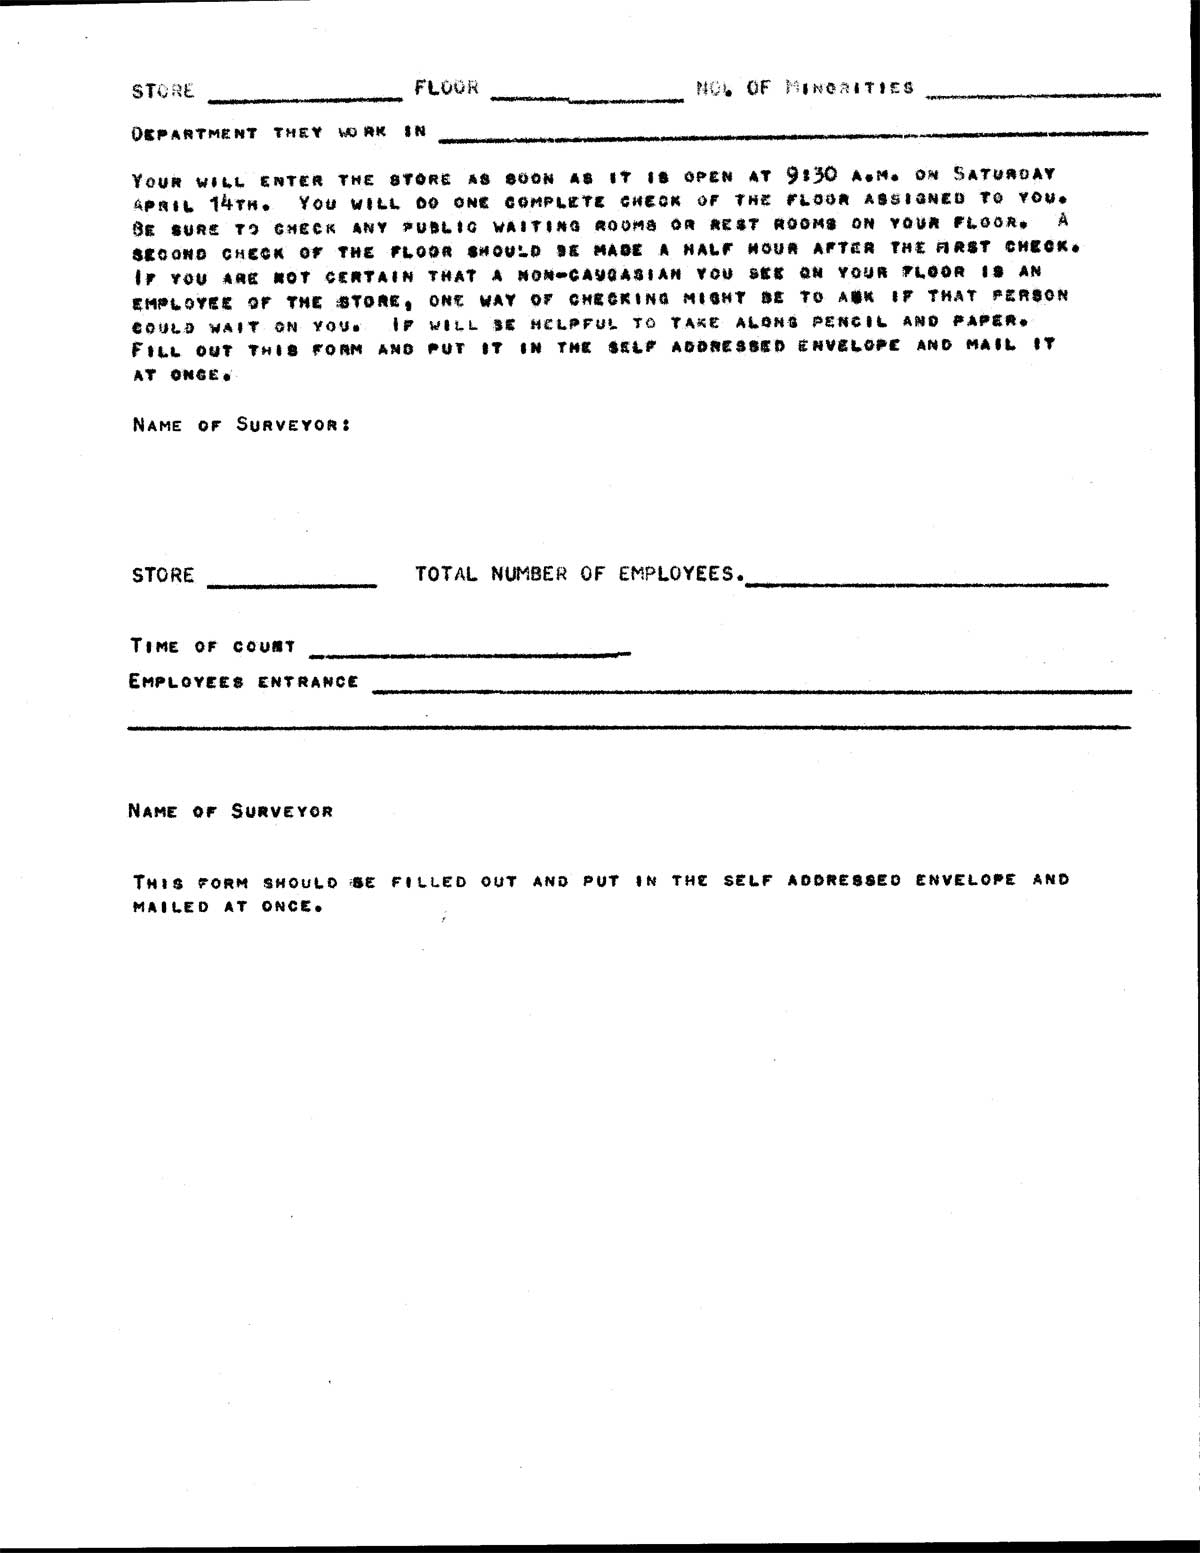 What are some examples of parole support letters?